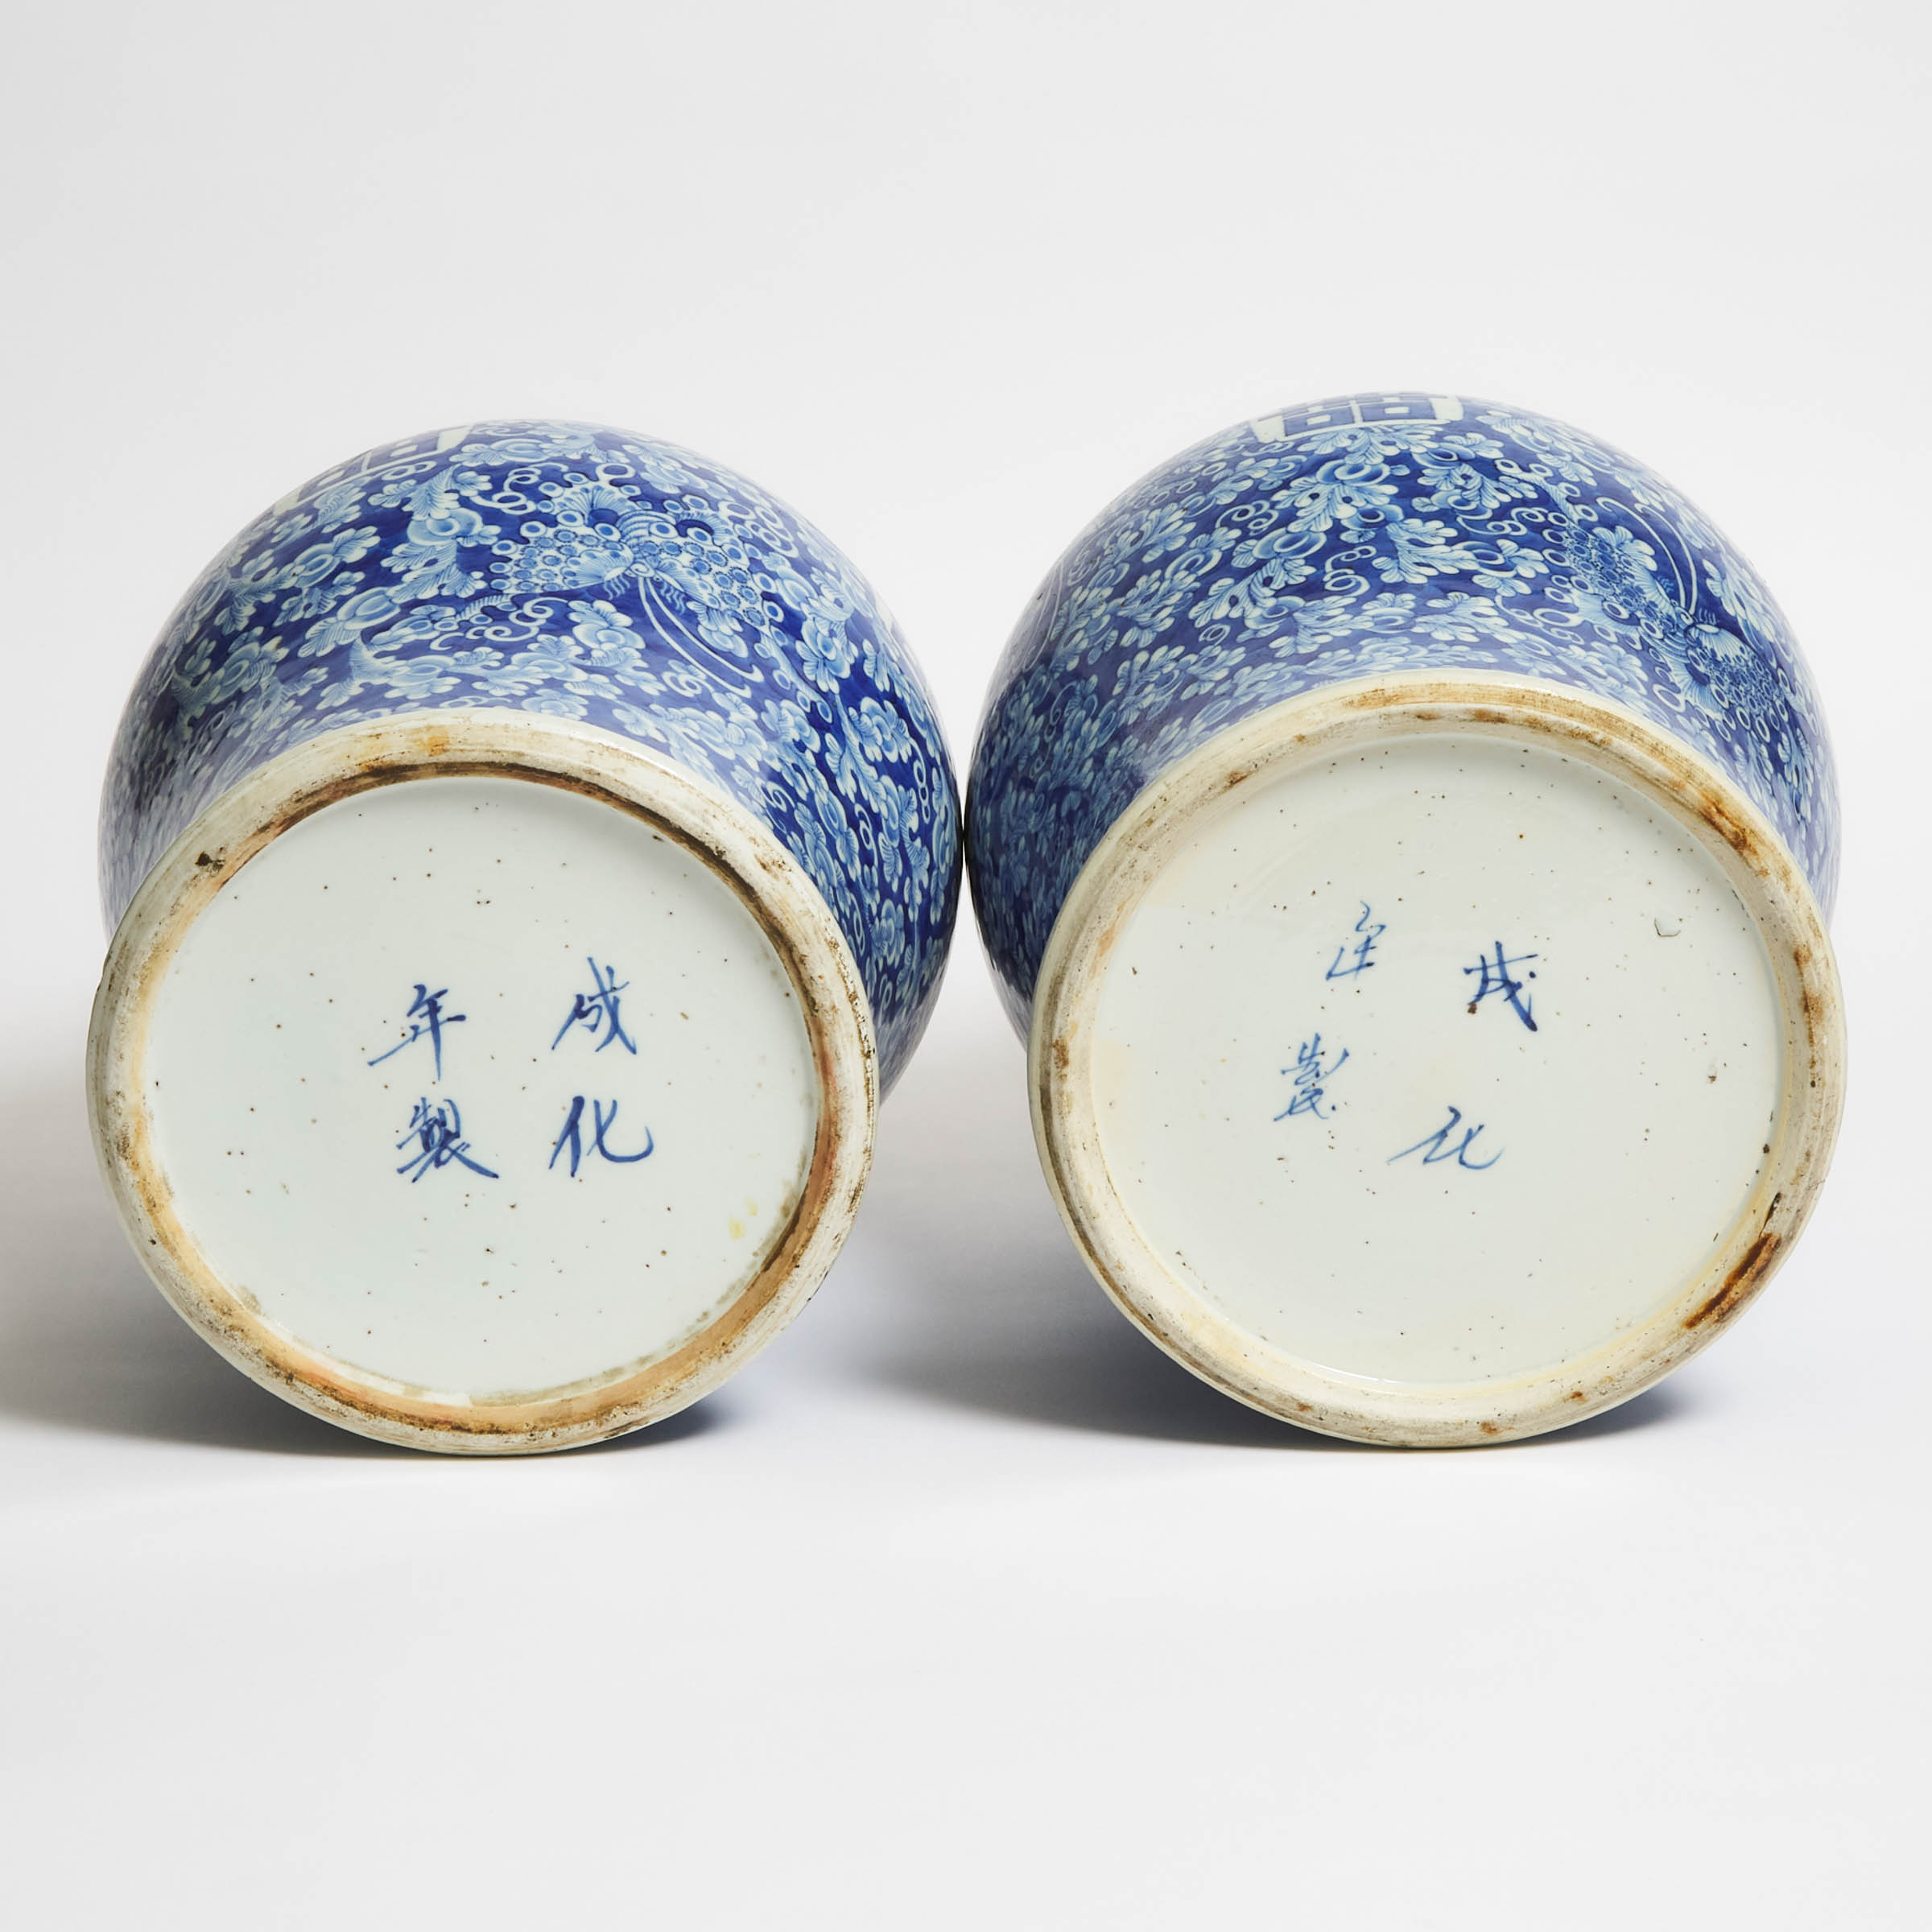 A Pair of Blue and White 'Double Happiness' Baluster Jars, 19th Century